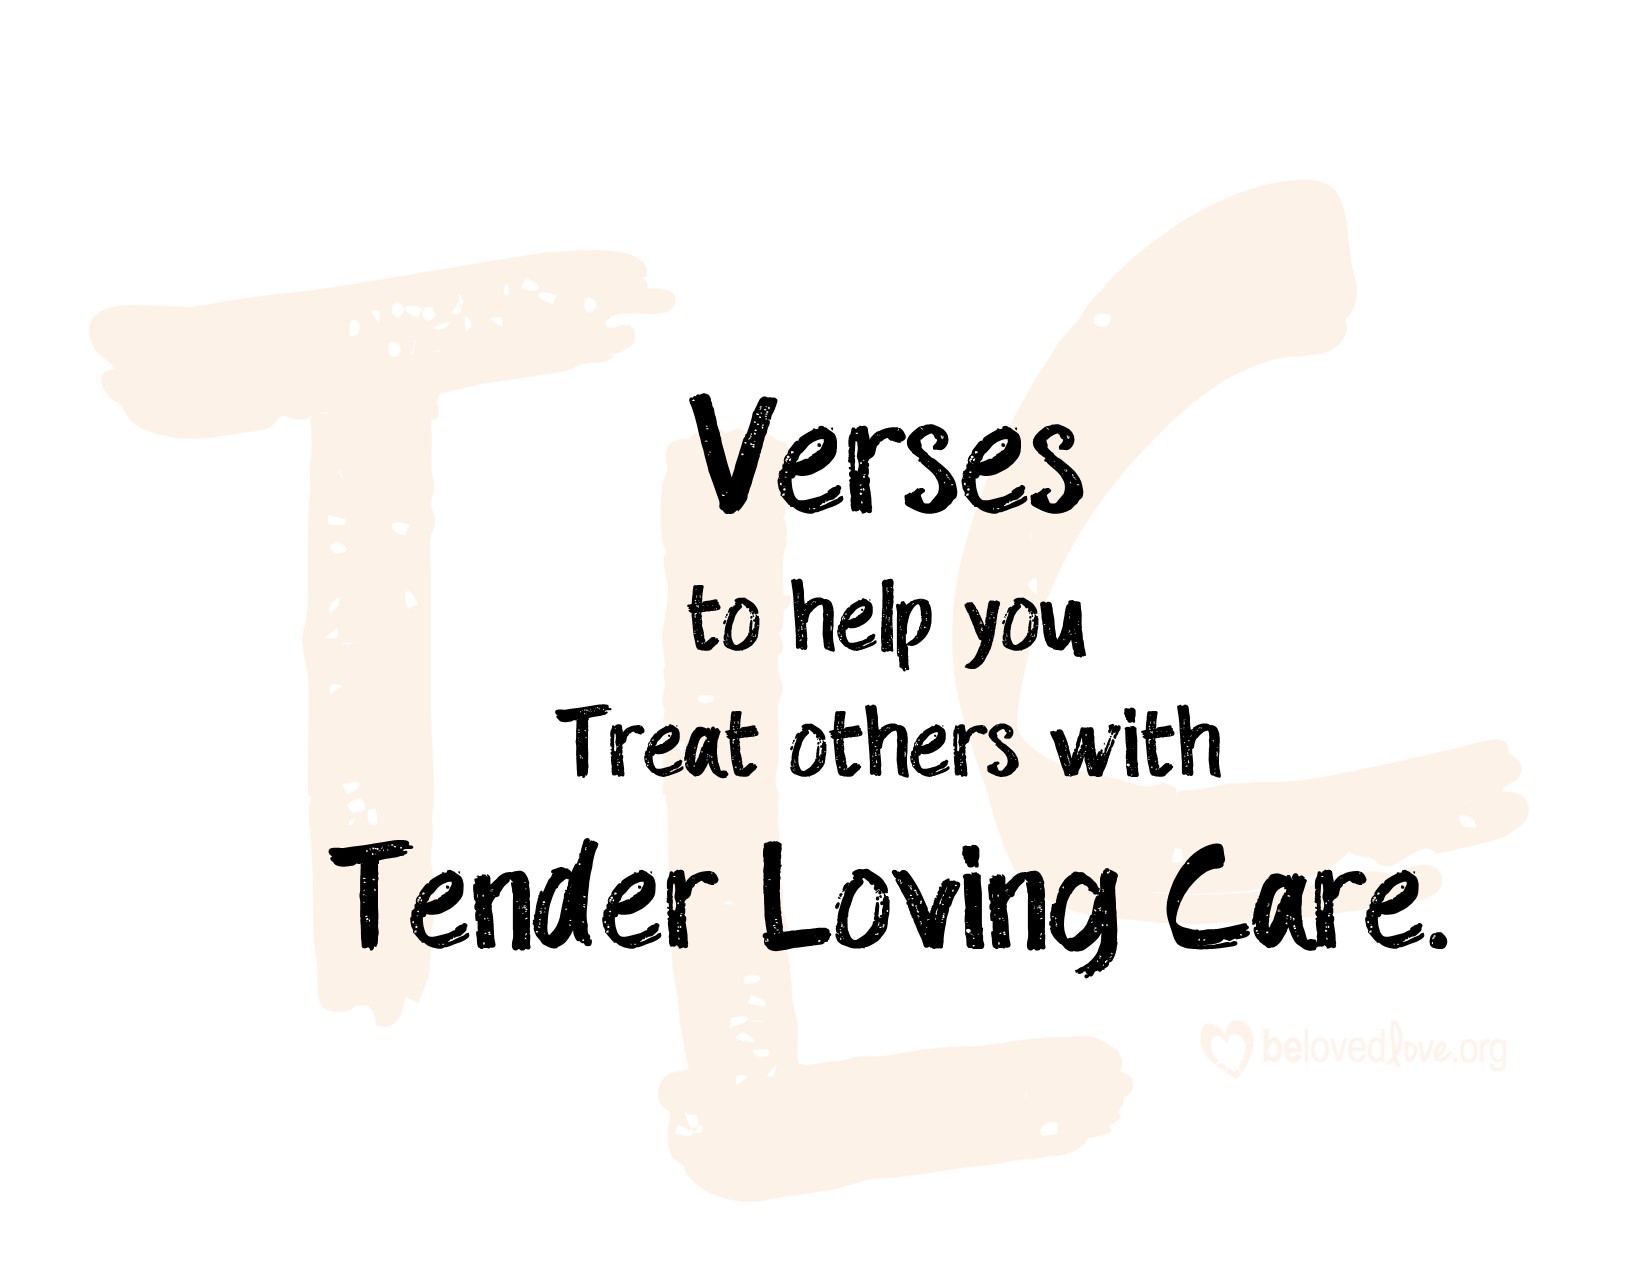 http://belovedlove.org/wp-content/uploads/2020/05/verses-to-help-you-treat-others-with-tender-loving-care.jpg